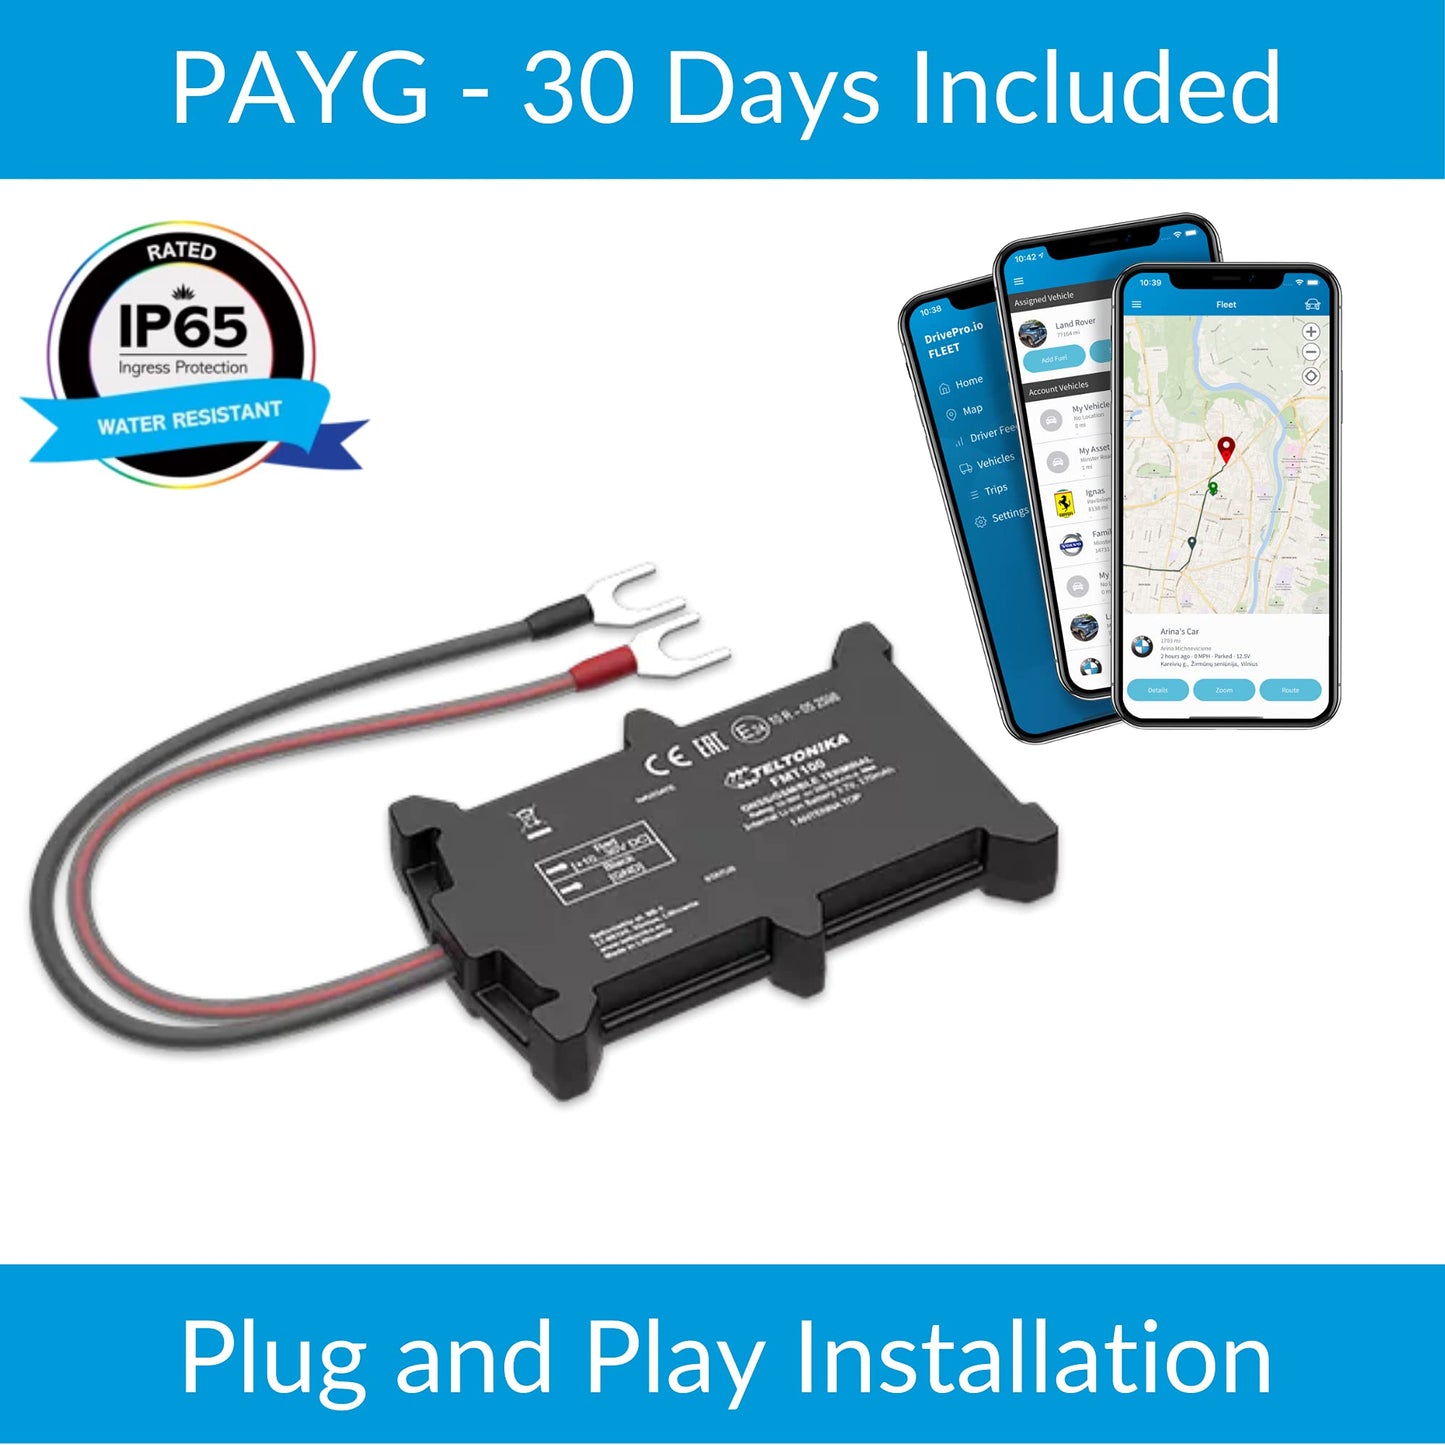 DrivePro Easy Fit GPS Tracker - Pay as You Go (REFURBISHED)